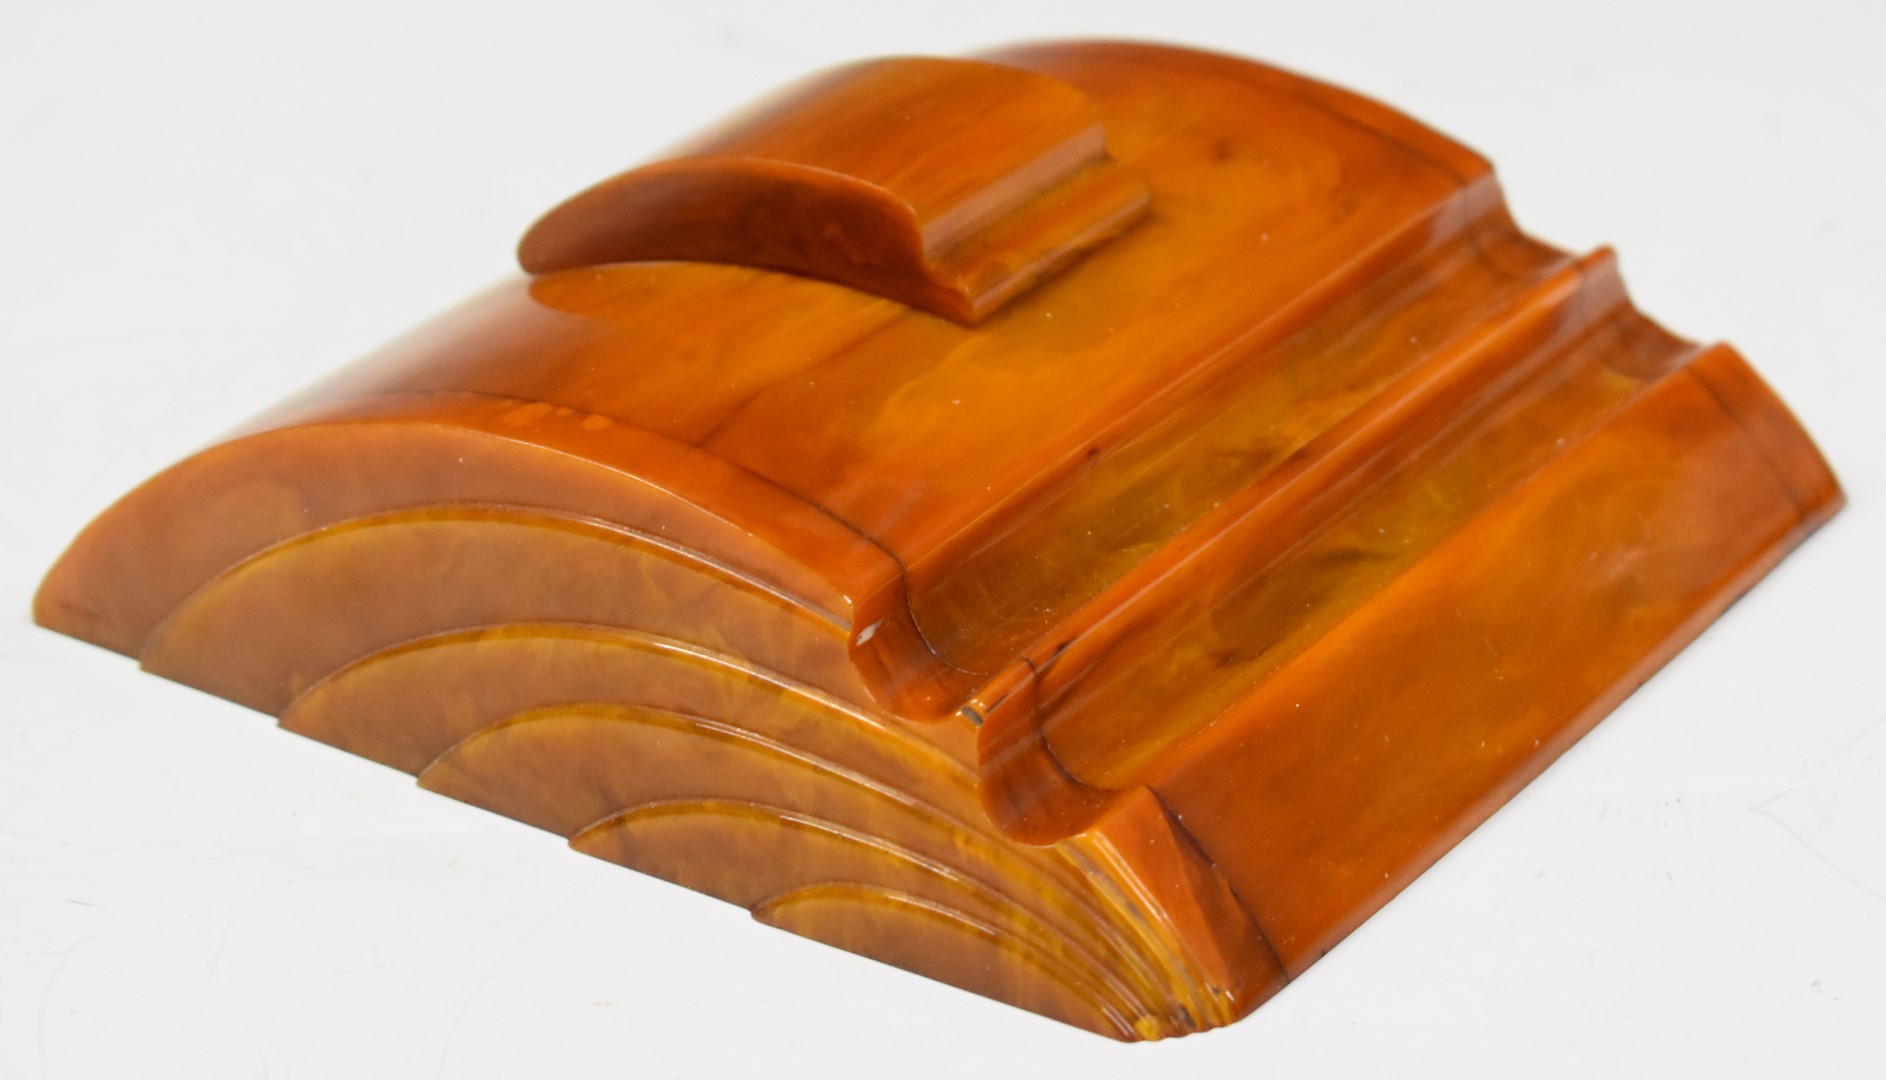 Cavacraft Art Deco Bakelite inkwell / standish with sliding cover in a faux amber effect finish, - Image 2 of 4